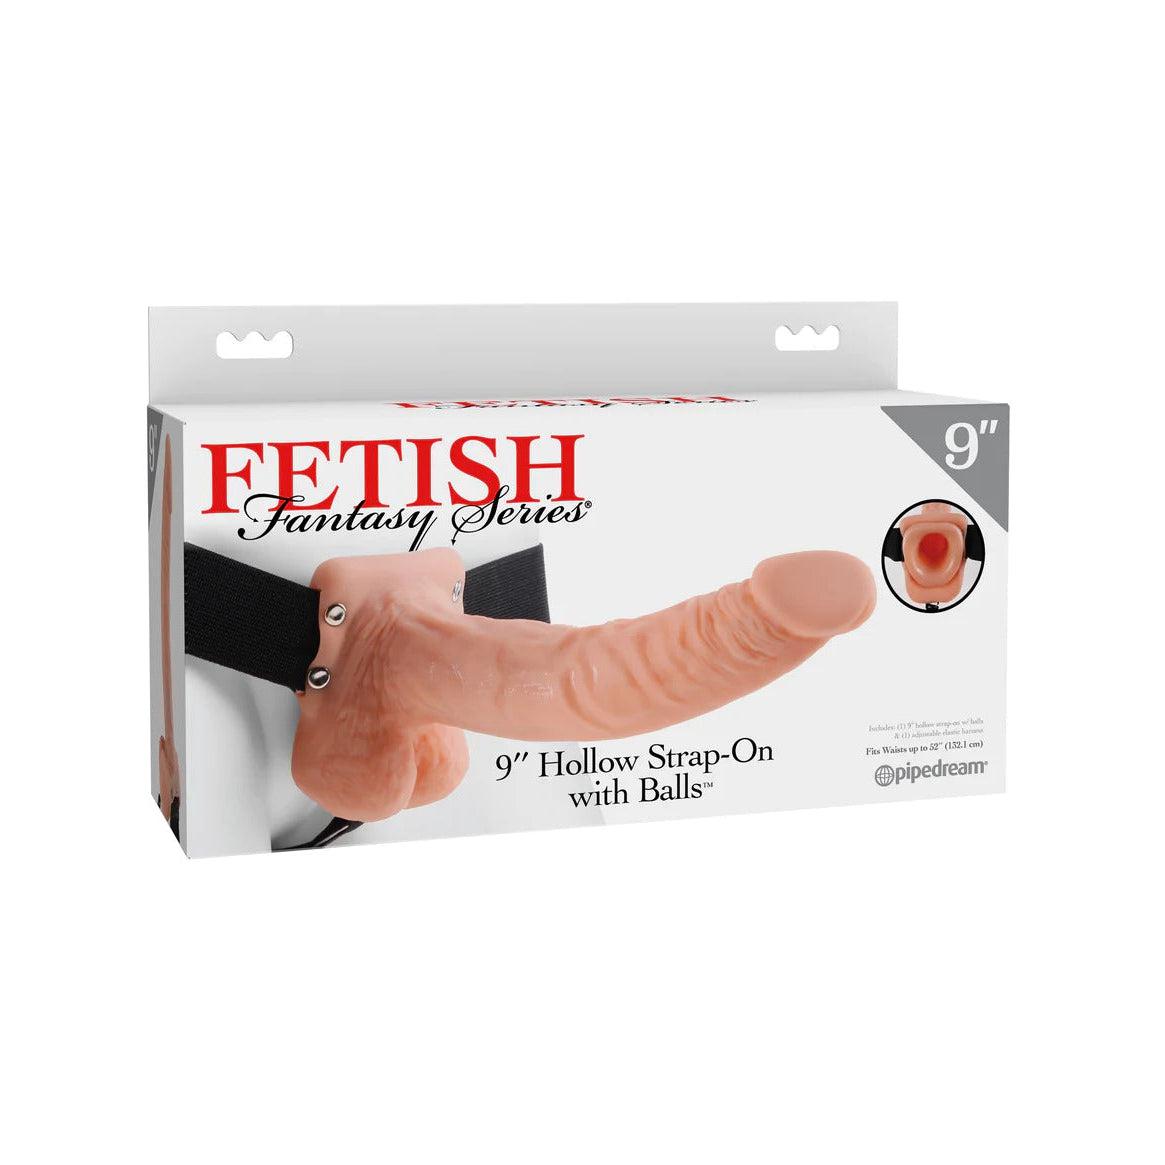 Fetish Fantasy Series 9 Inch Hollow Strap-On With Balls